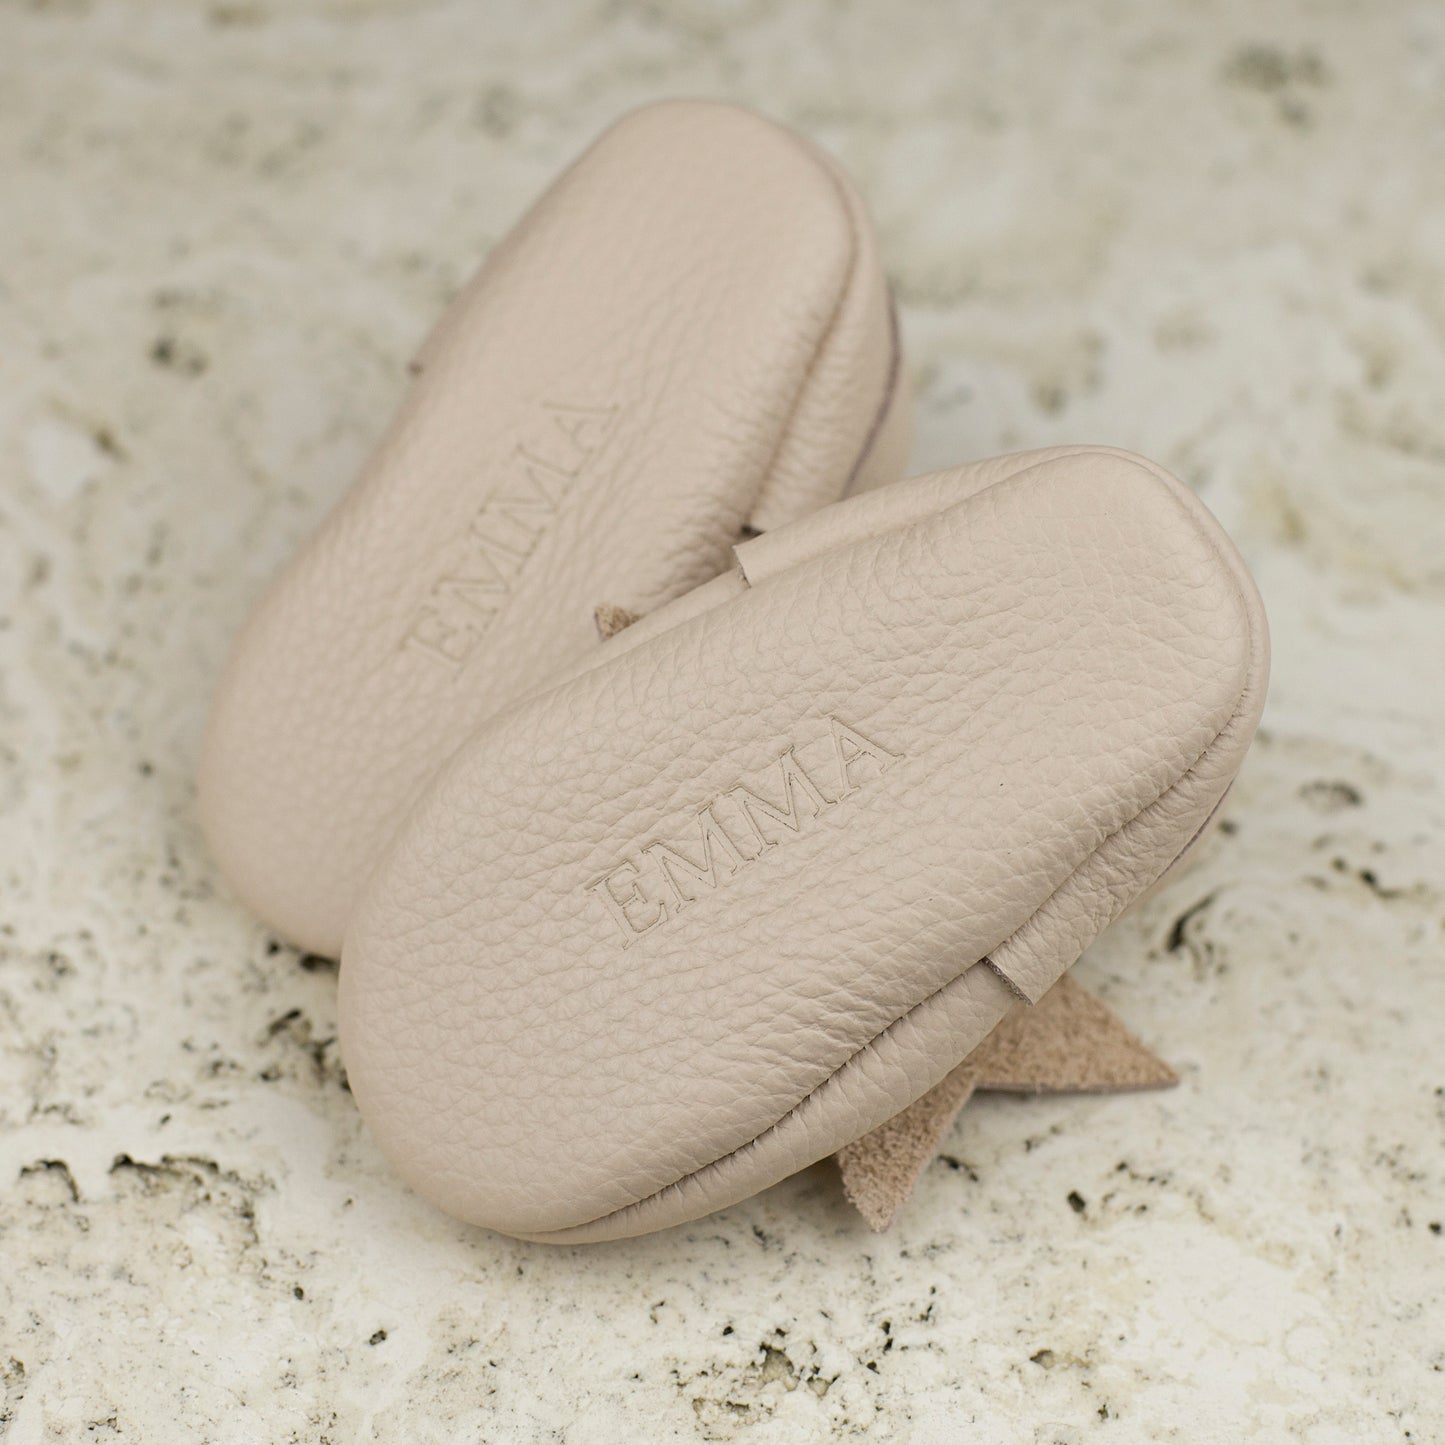 Soft sole baby shoes